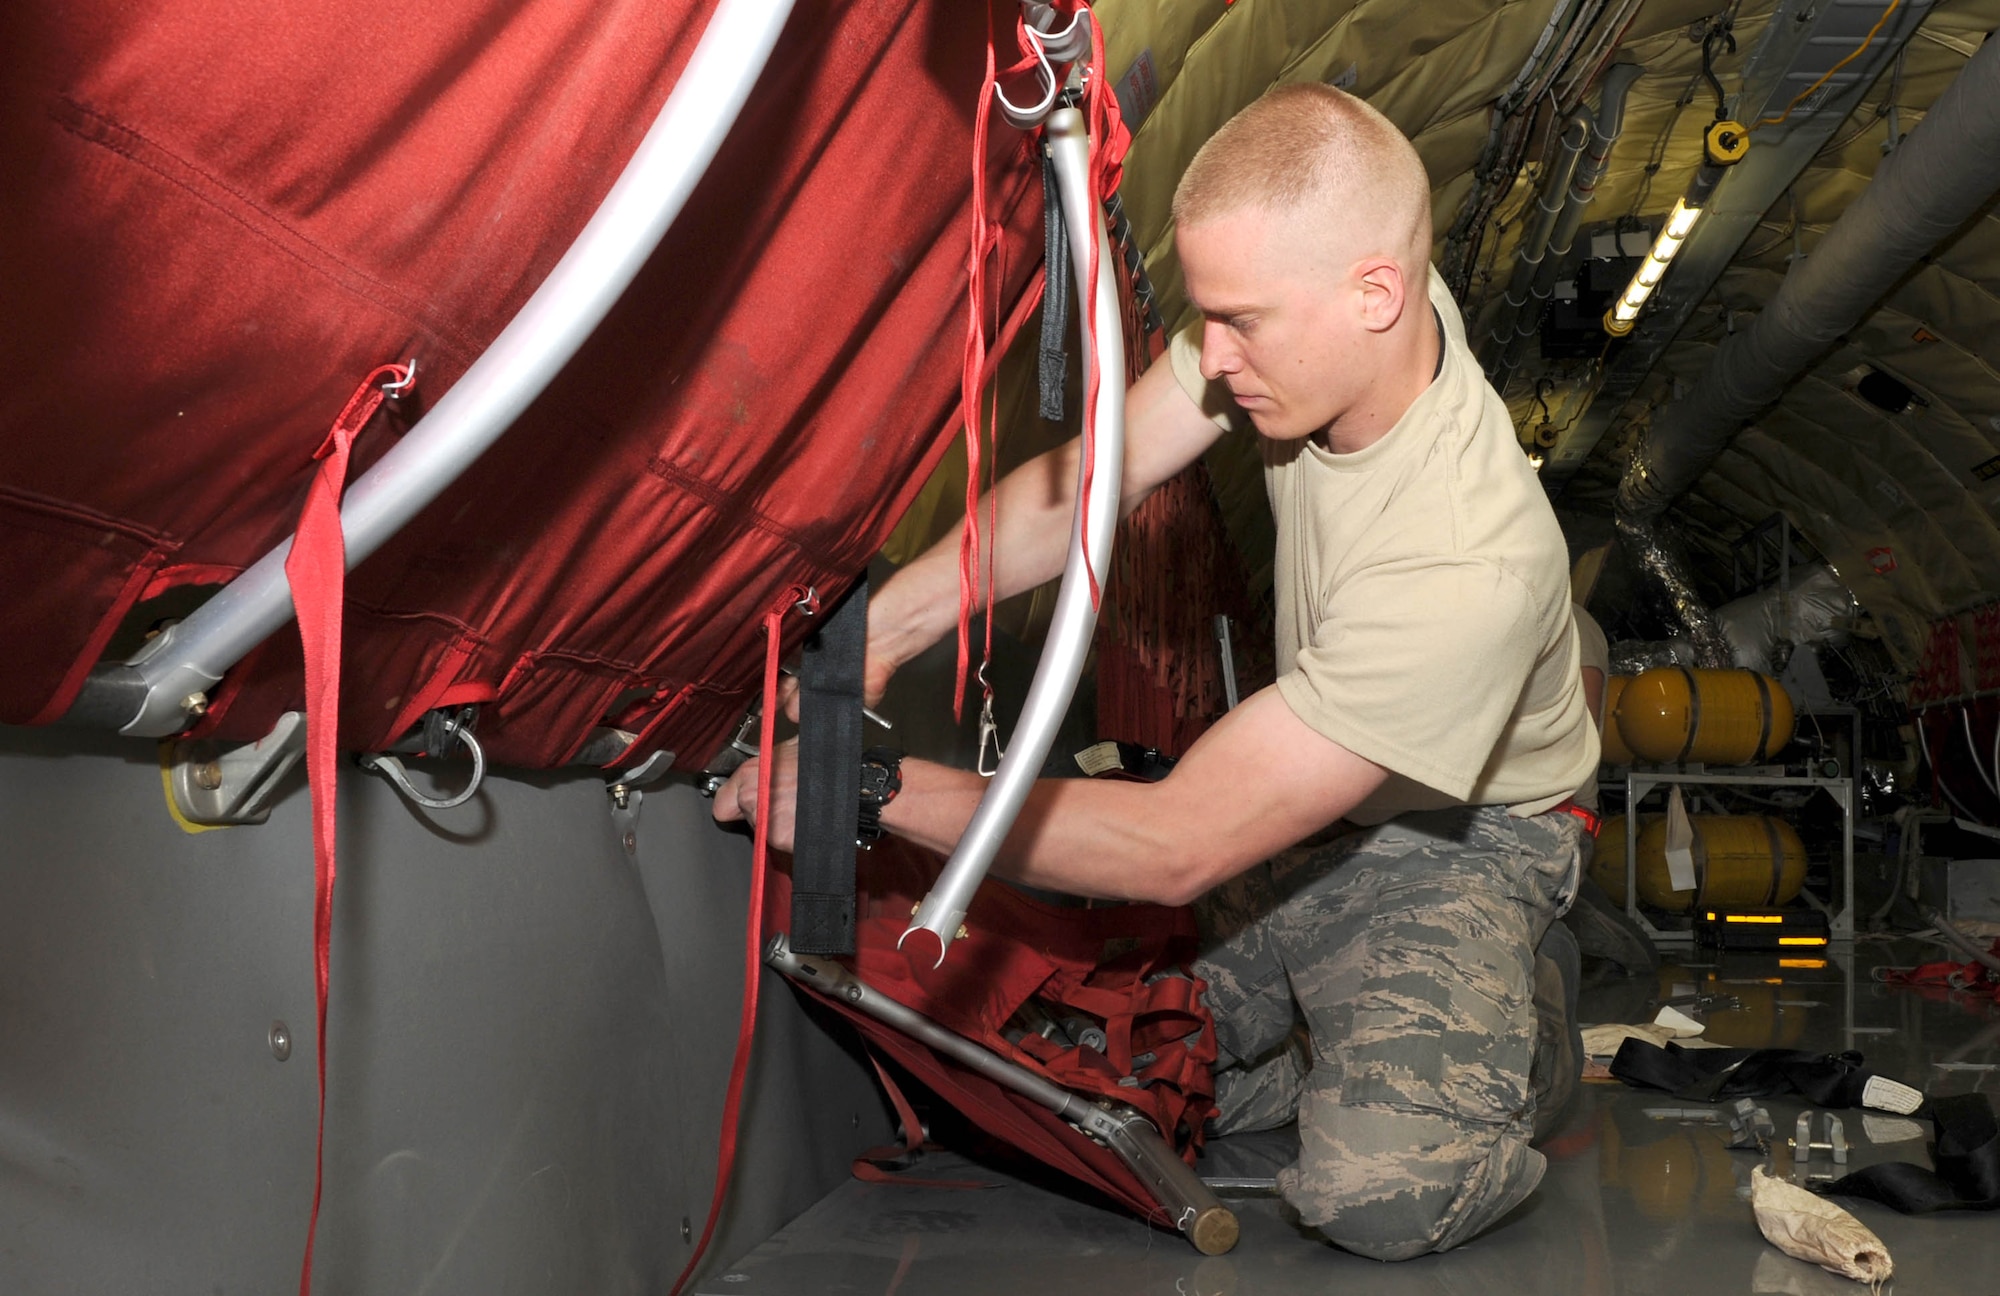 Senior Airman Robert Viera, a 22nd Maintenance Squadron aerospace maintenance journeyman, disassembles a damaged troop seat on a KC-135 Stratotanker during a periodic inspection, April 13, 2015, at McConnell Air Force Base, Kan. During the inspections, maintenance crews thoroughly examine the entire aircraft and make any necessary repairs. (U.S. Air Force photo/Airman 1st Class Tara Fadenrecht)